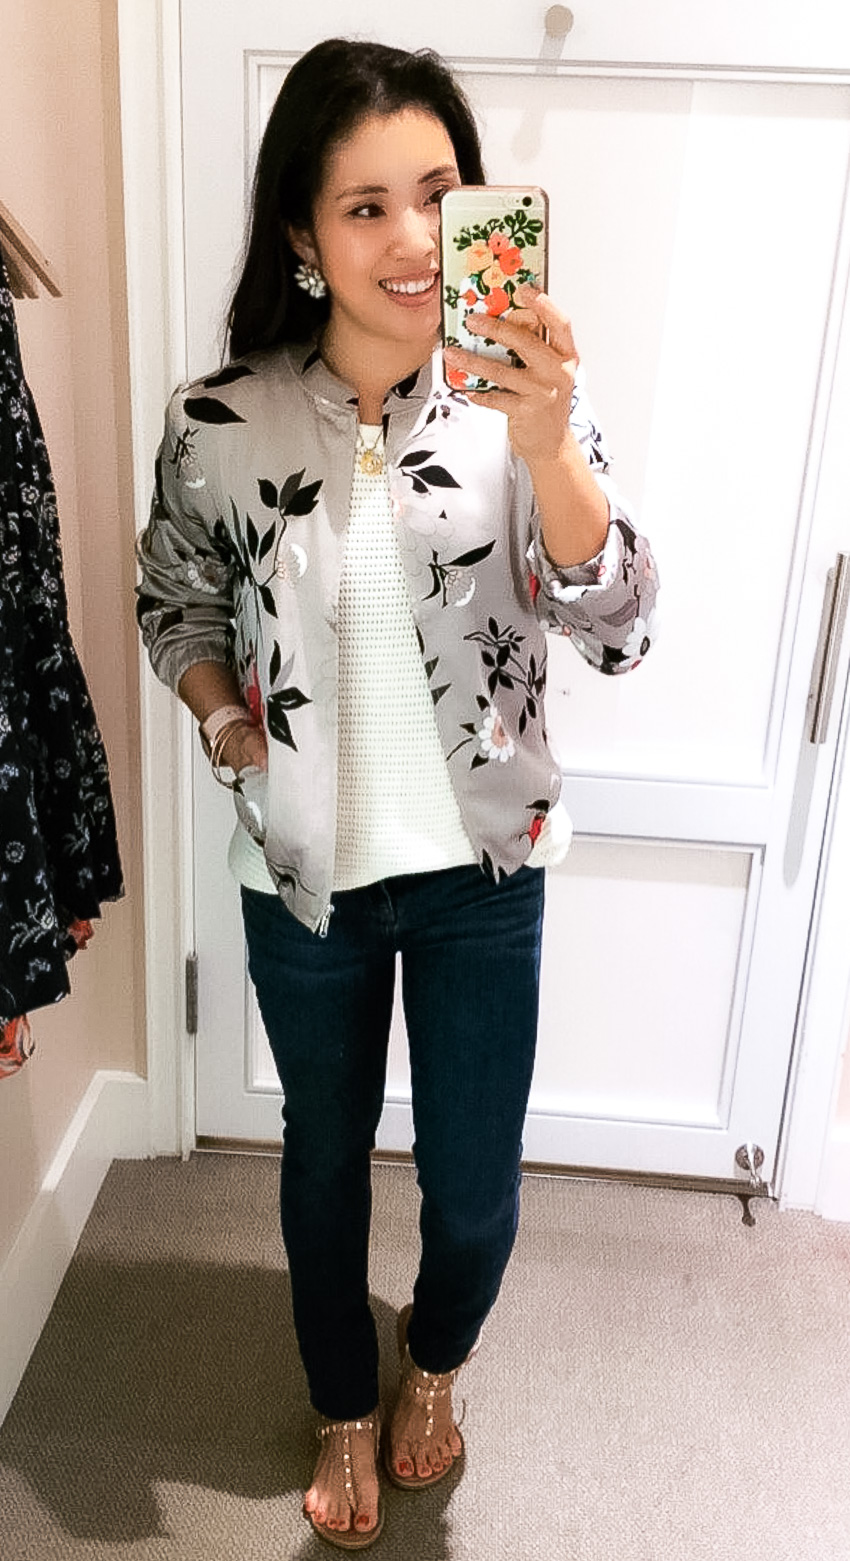 LOFT Sale: Dressing Room Diaries by Dallas fashion blogger cute and little | botanical charmeuse bomber jacket | loft dressing room review